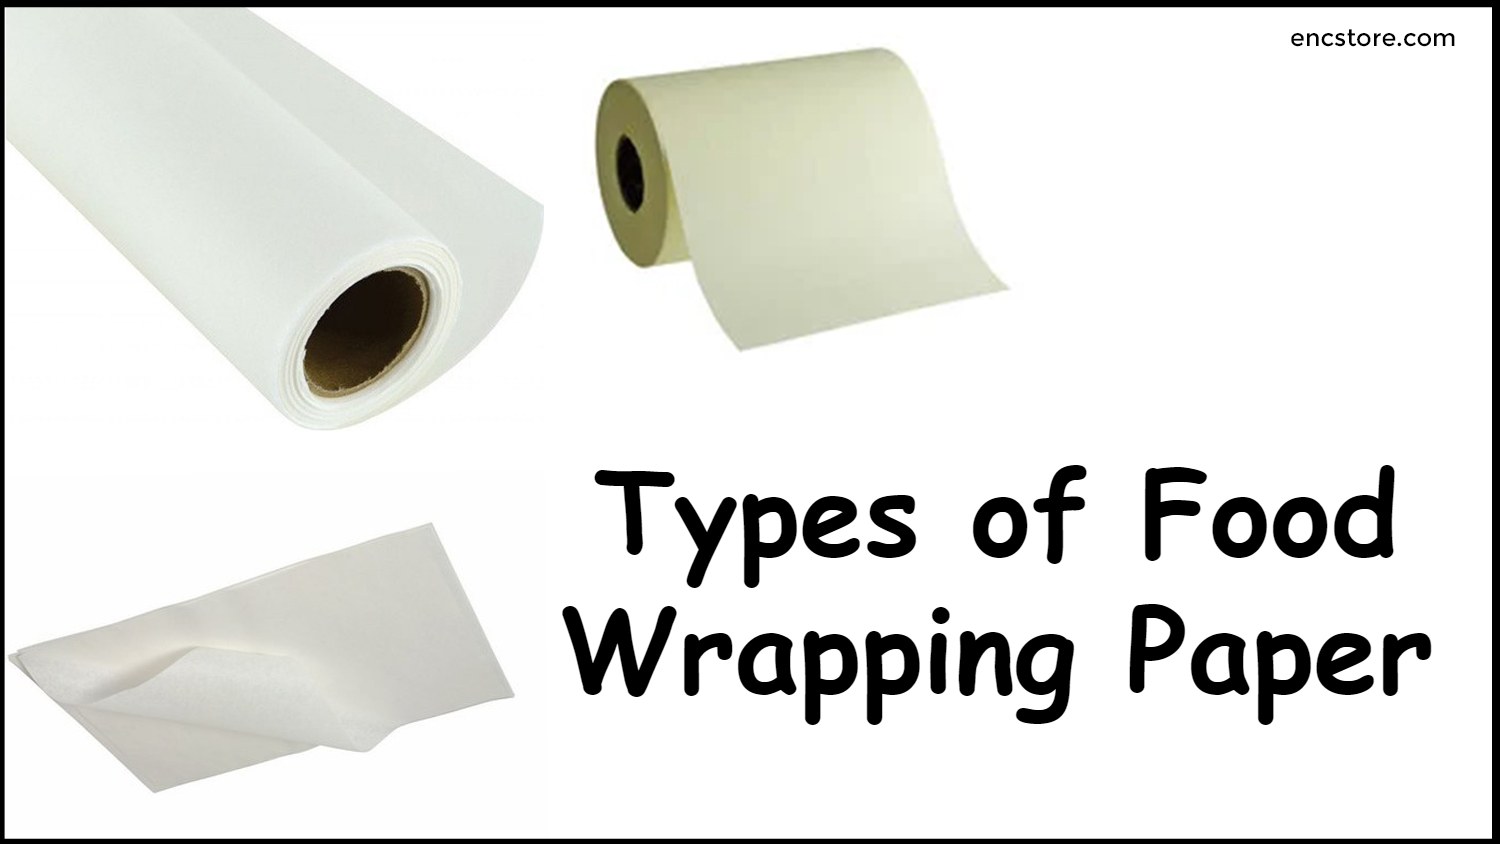 Types of Food Wrapping Paper